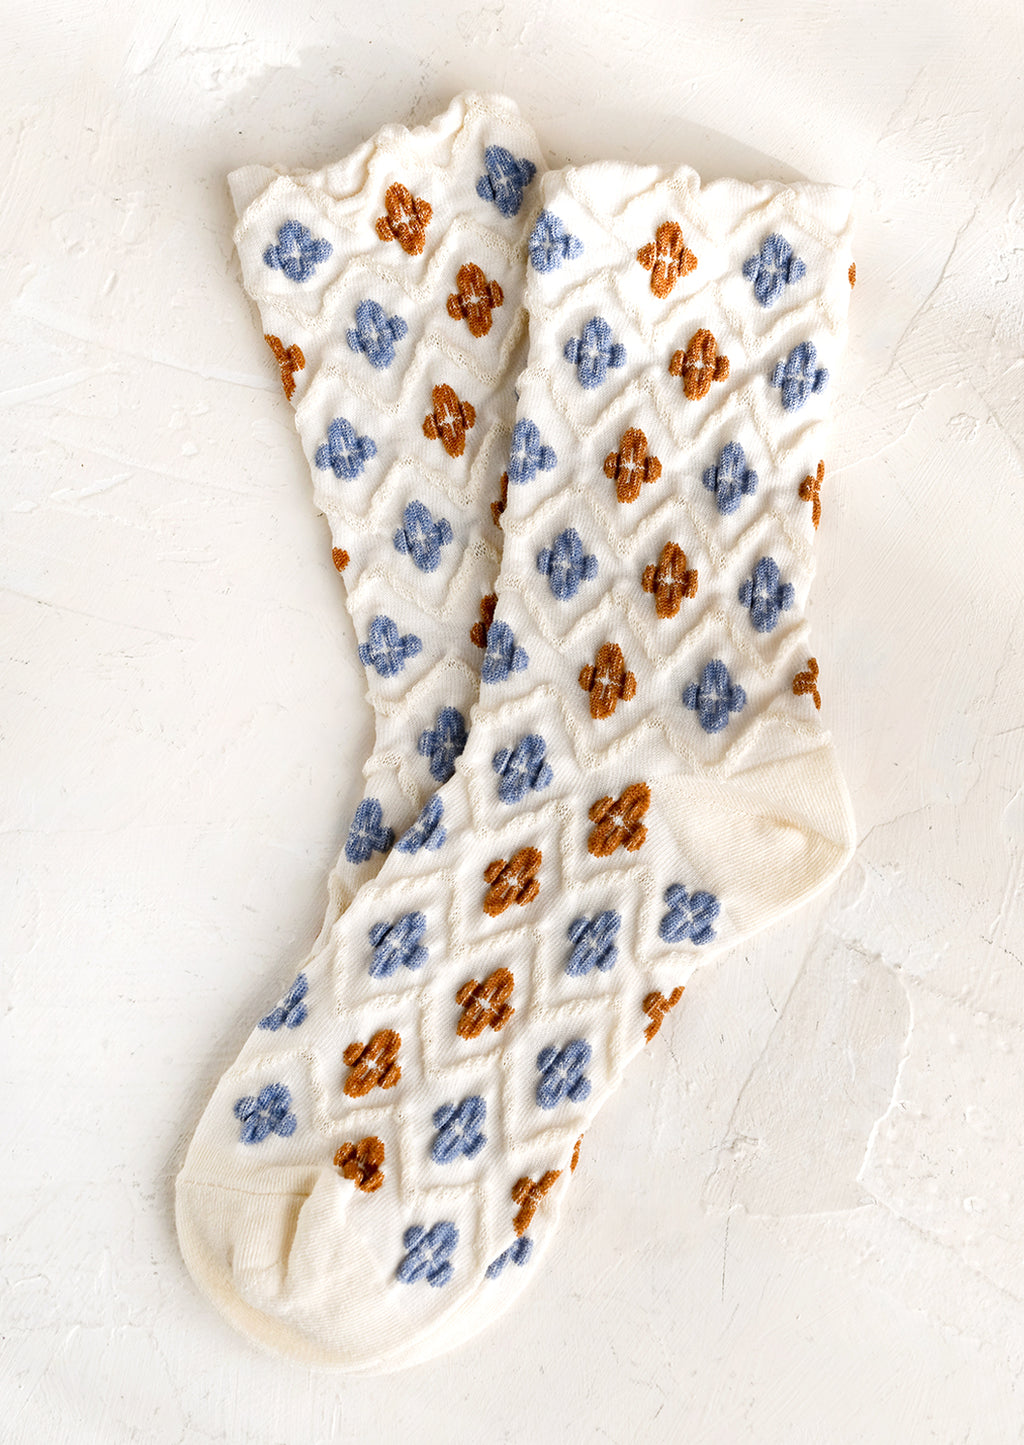 1: A pair of ivory socks with raised diamond texture and blue and brown clover shapes.